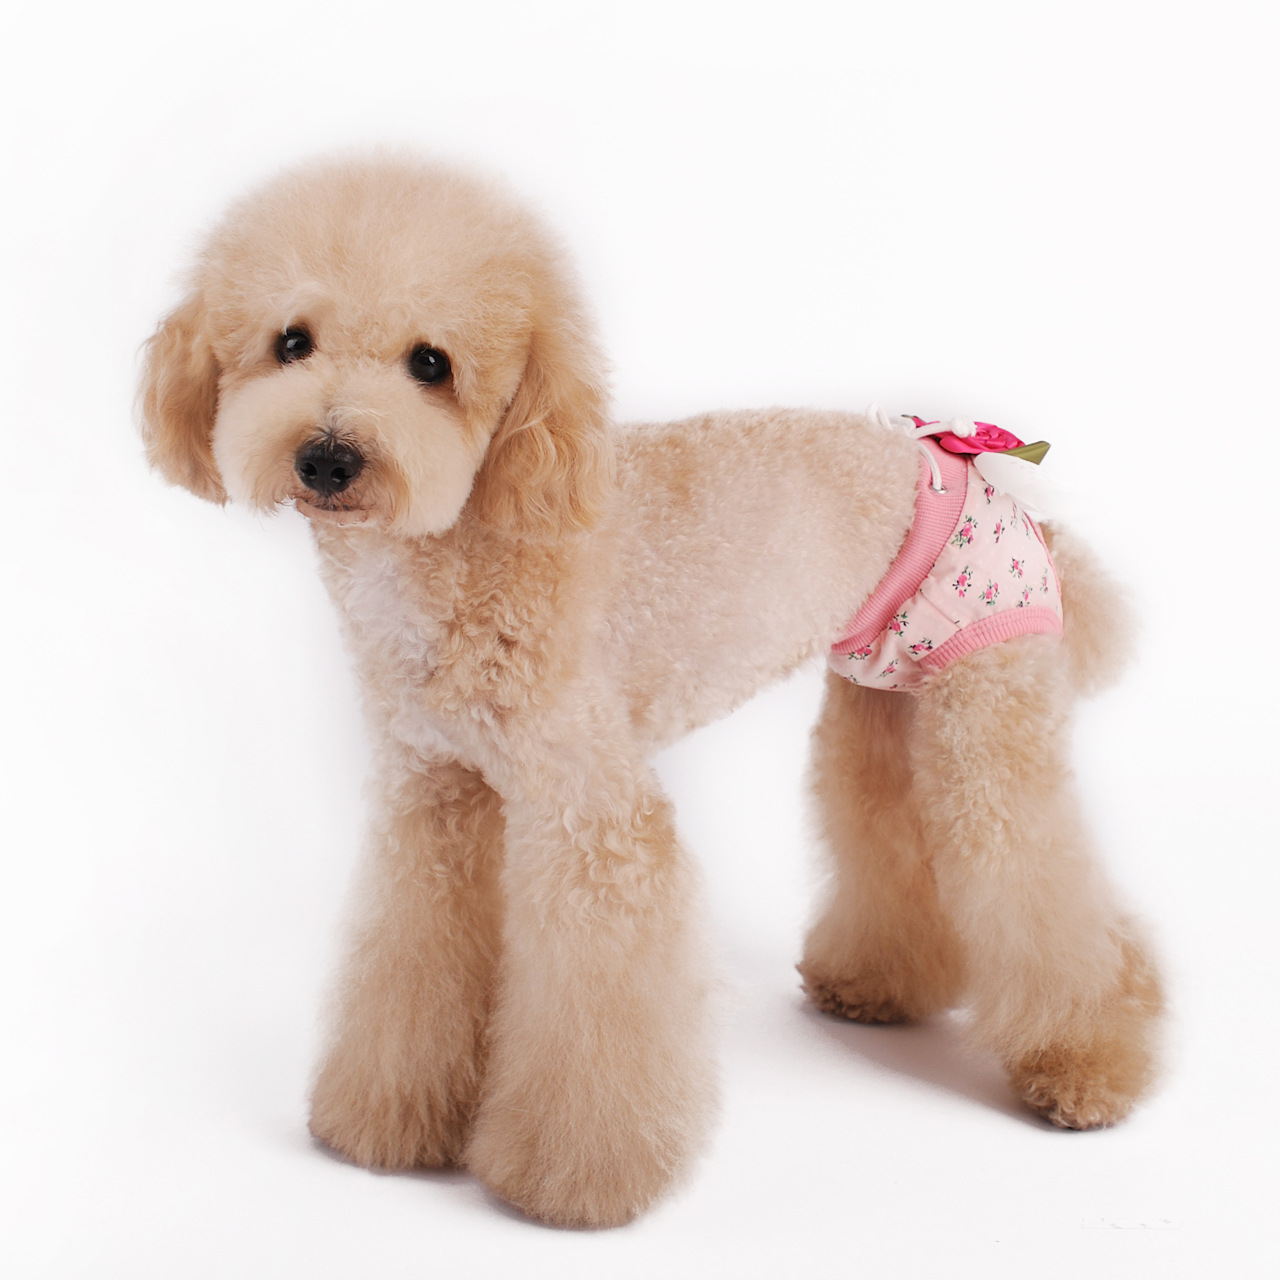 Pet Dog Puppy Female Sanitary Clothes Physiological Shorts Diaper Pink L